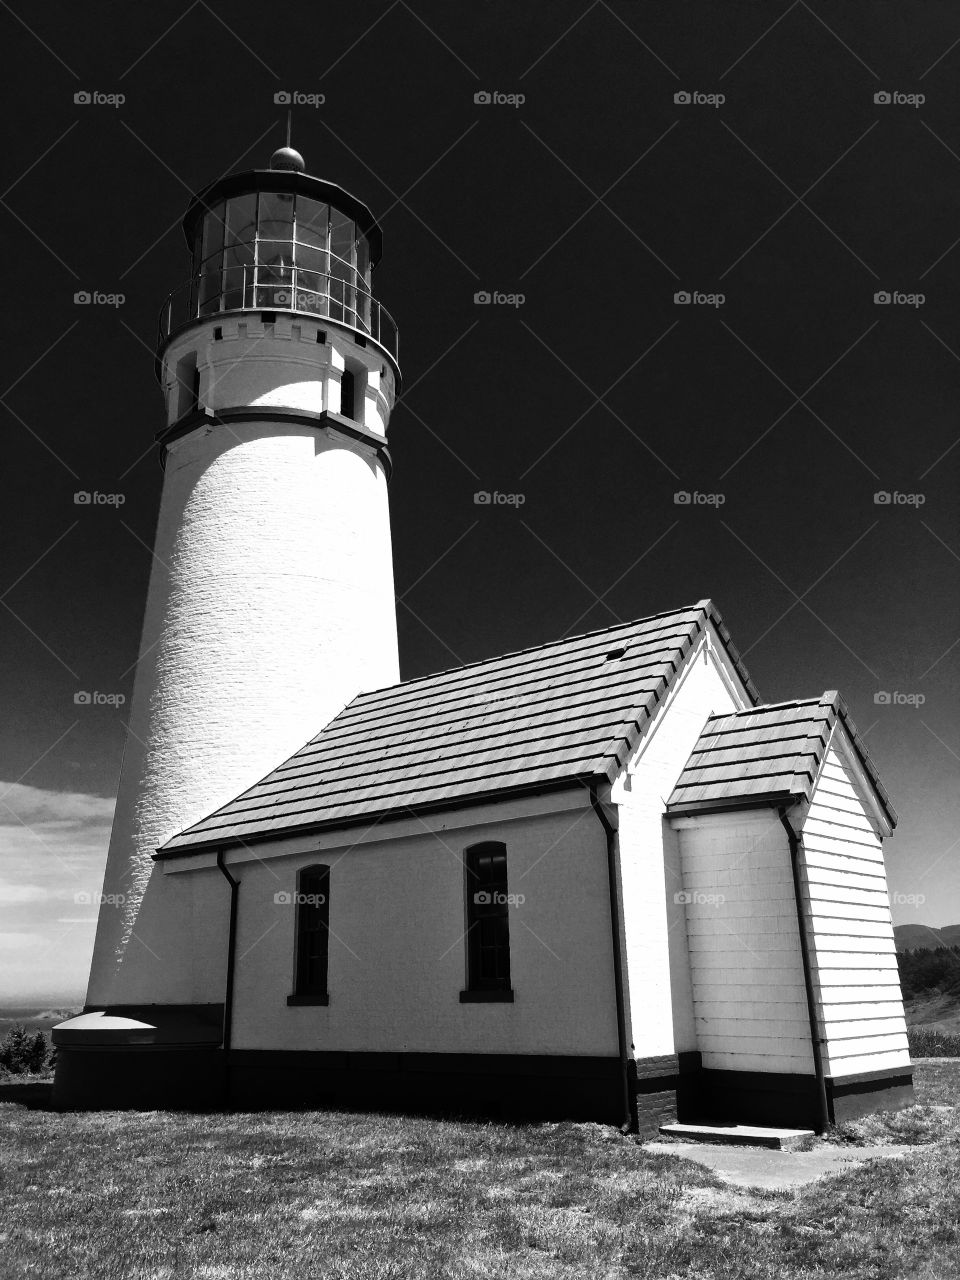 Low angle view of lighthouse